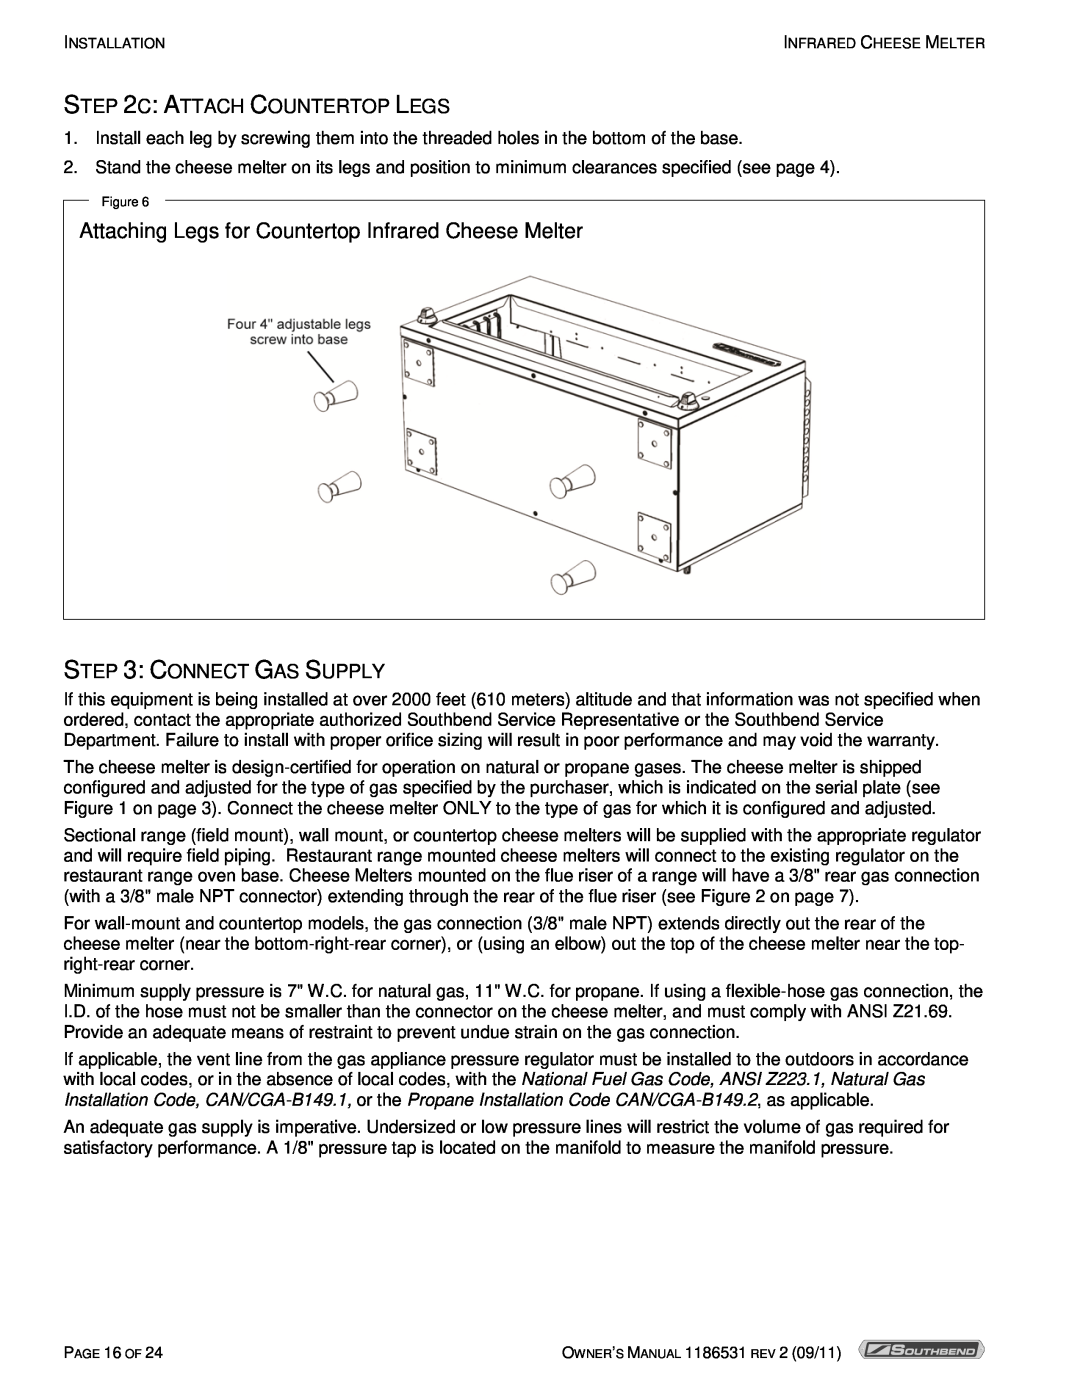 Southbend P24-CM manual Attaching Legs for Countertop Infrared Cheese Melter, C Attach Countertop Legs, Connect Gas Supply 